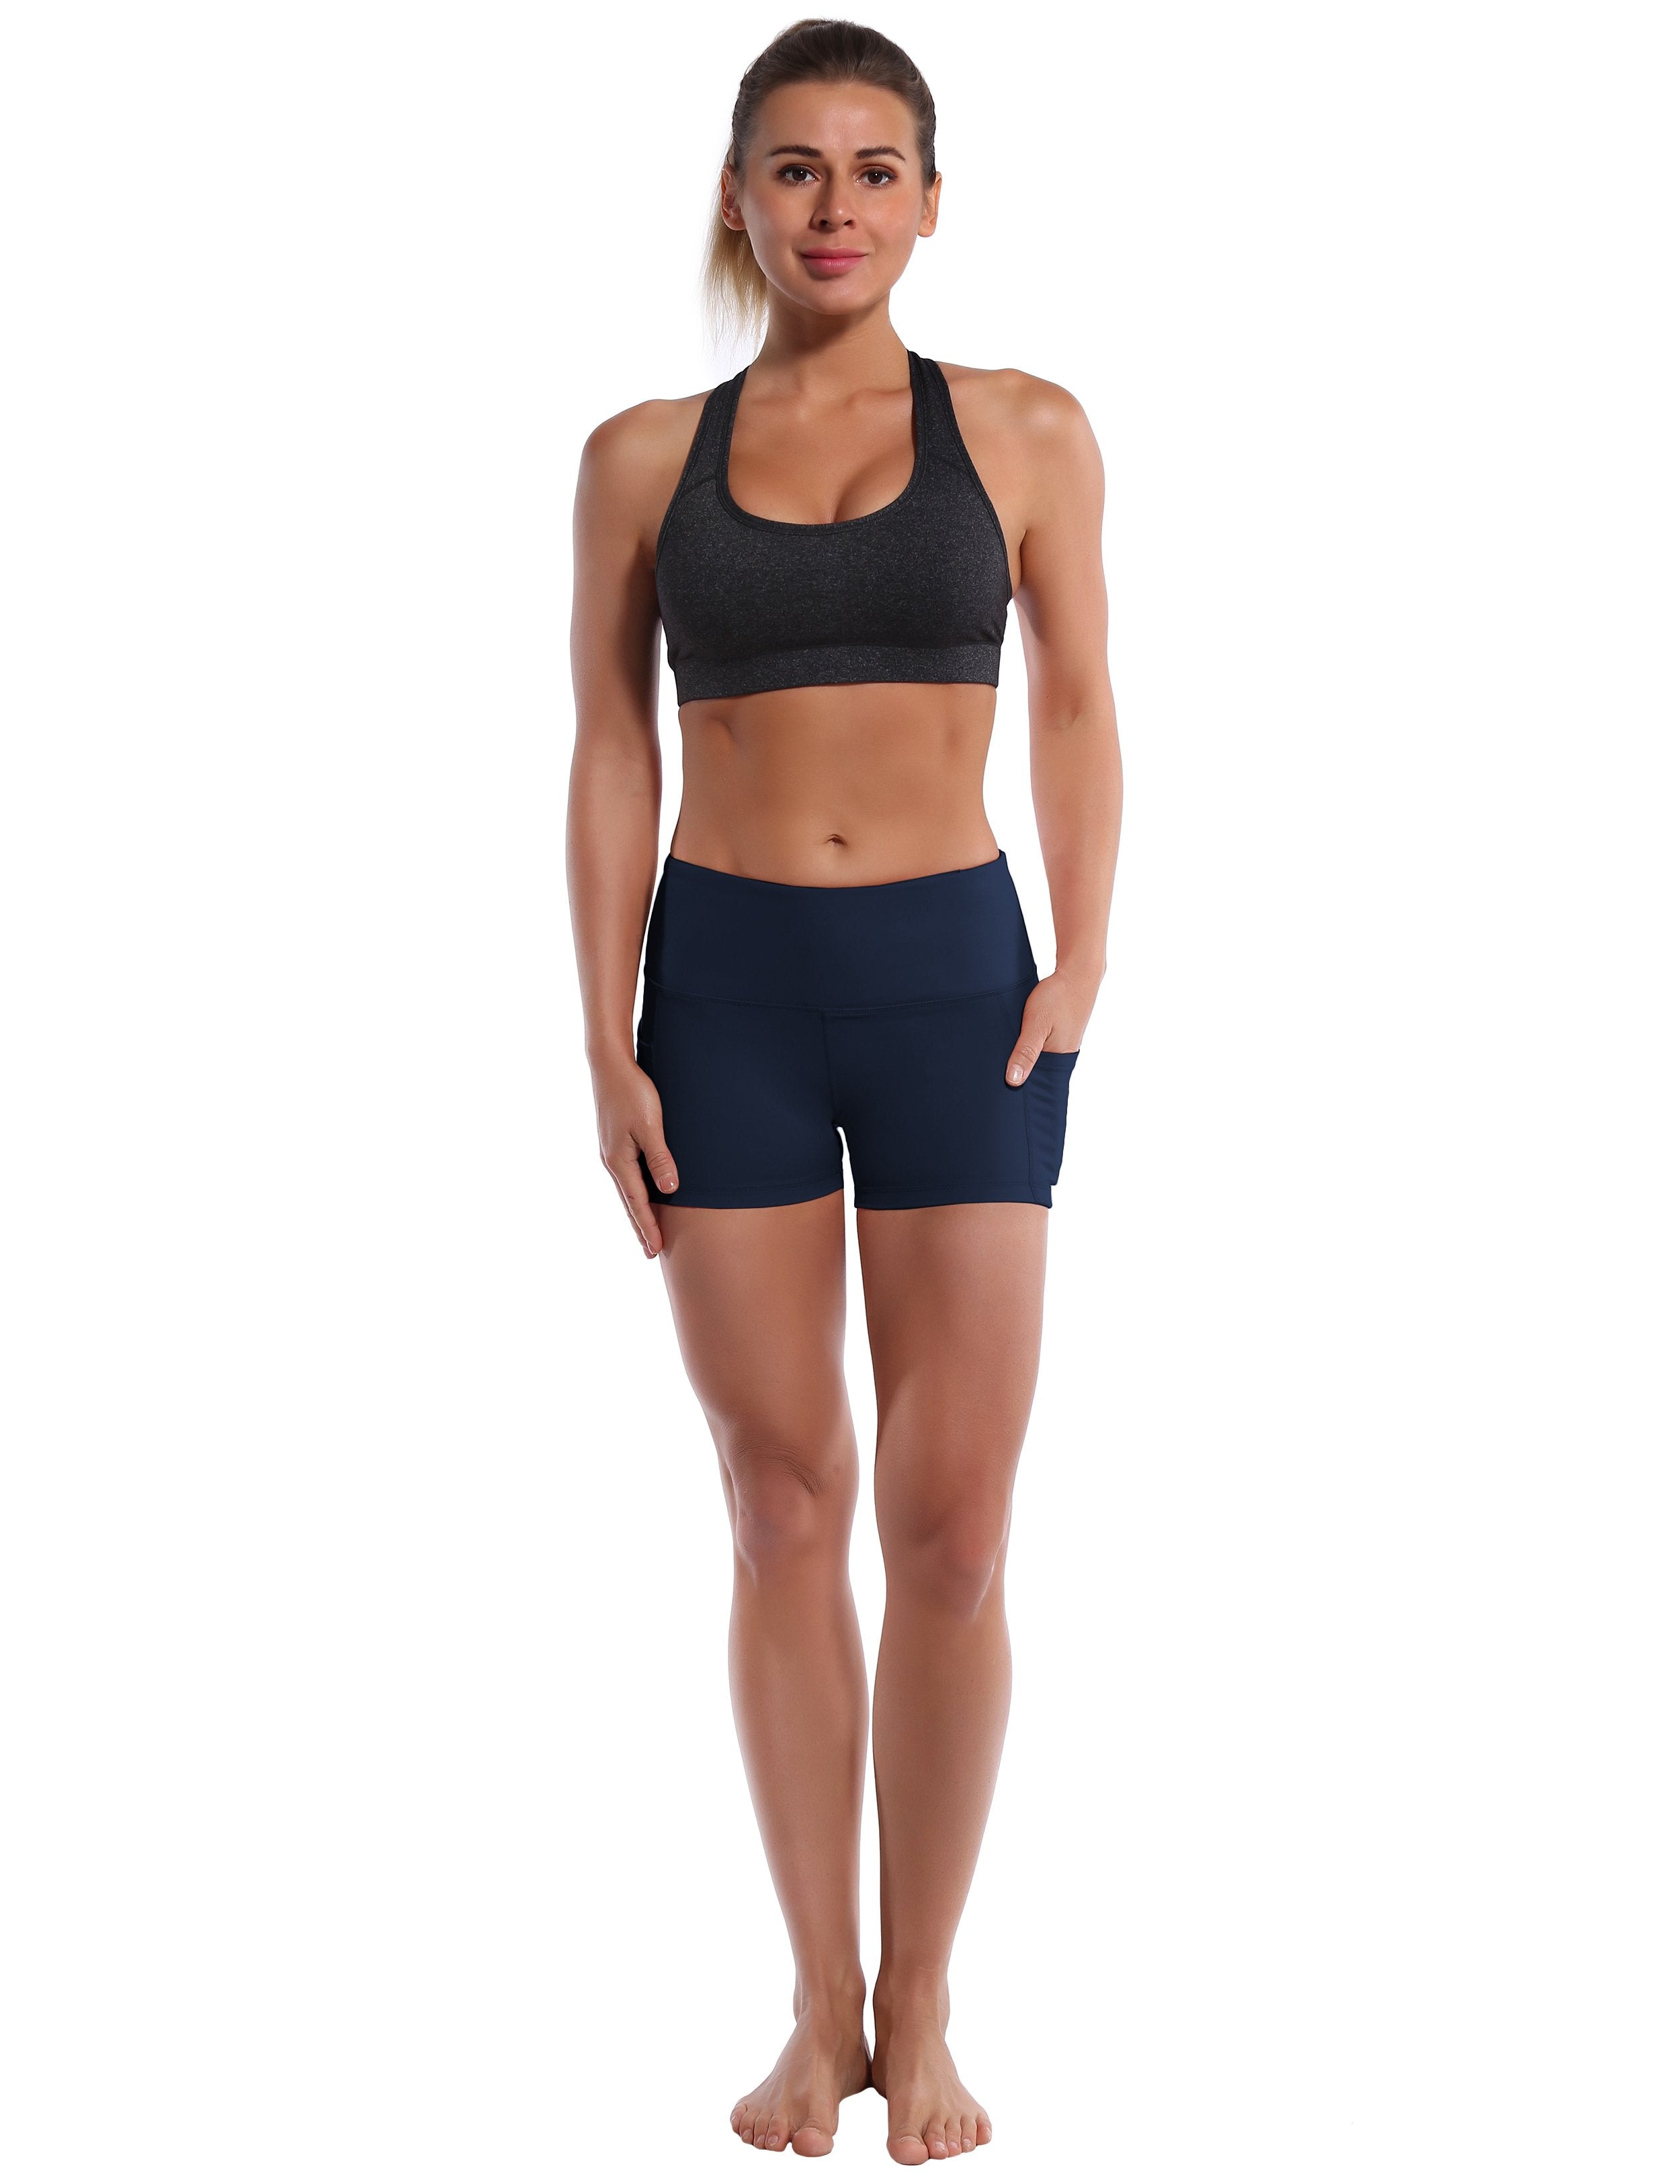 2.5" Side Pockets Tall Size Shorts darknavy Sleek, soft, smooth and totally comfortable: our newest sexy style is here. Softest-ever fabric High elasticity High density 4-way stretch Fabric doesn't attract lint easily No see-through Moisture-wicking Machine wash 78% Polyester, 22% Spandex